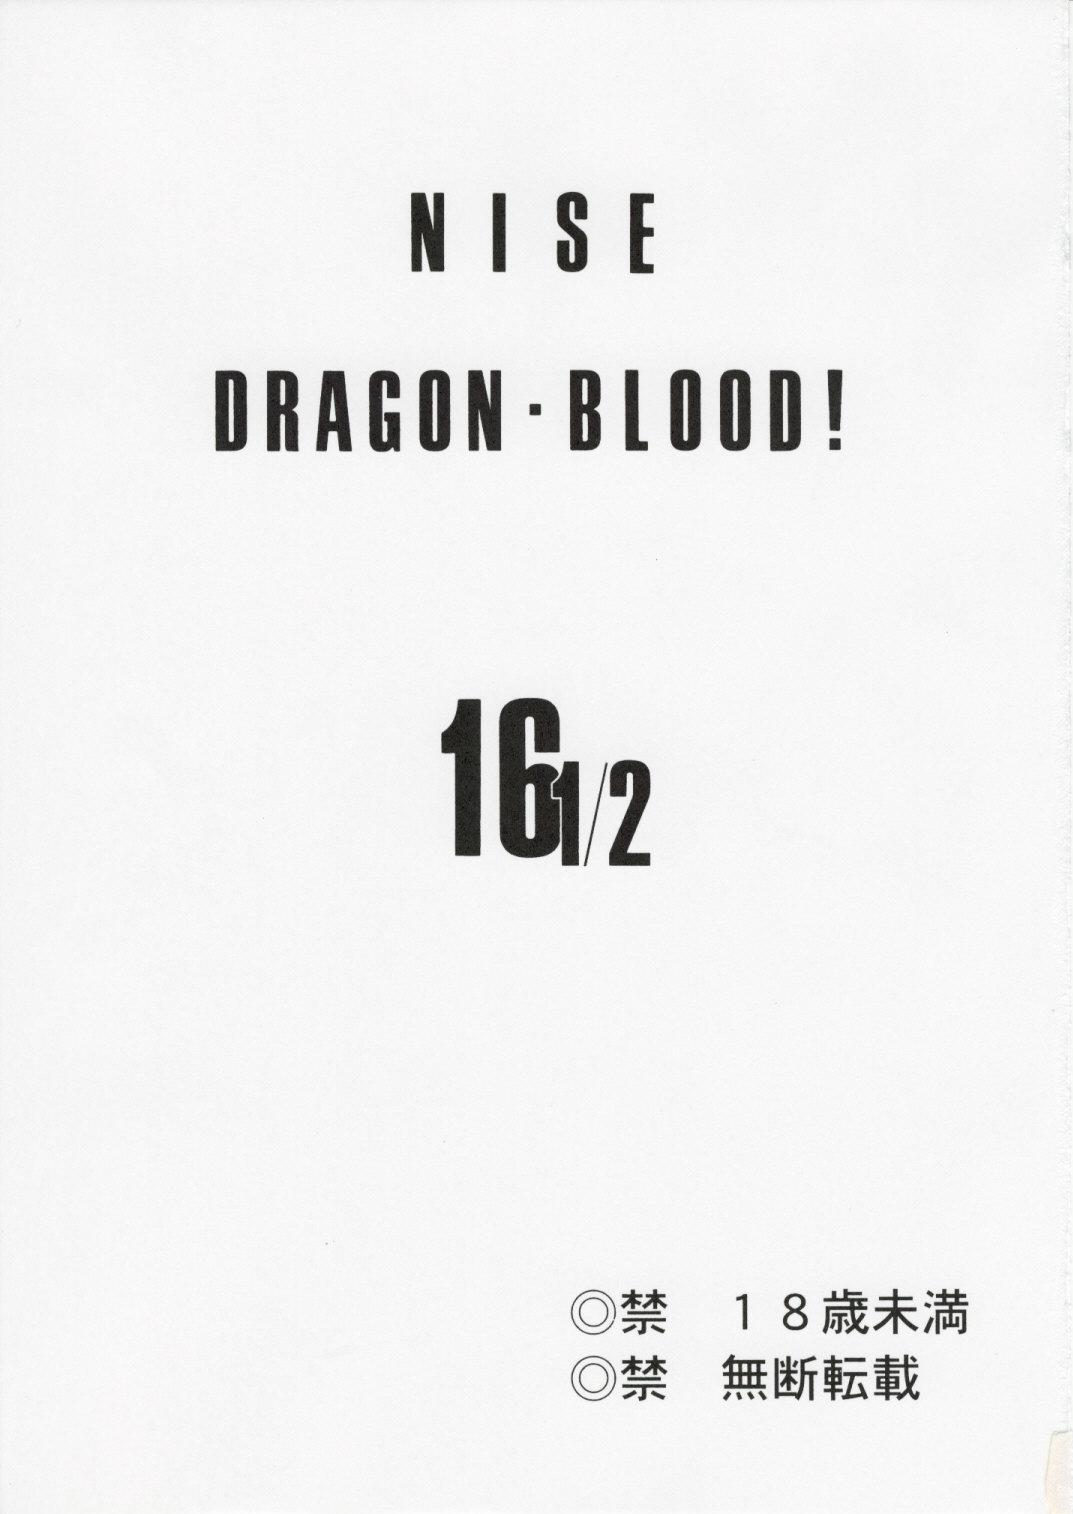 Hot Fuck Nise DRAGON BLOOD! 16 1/2 Sexteen - Page 3